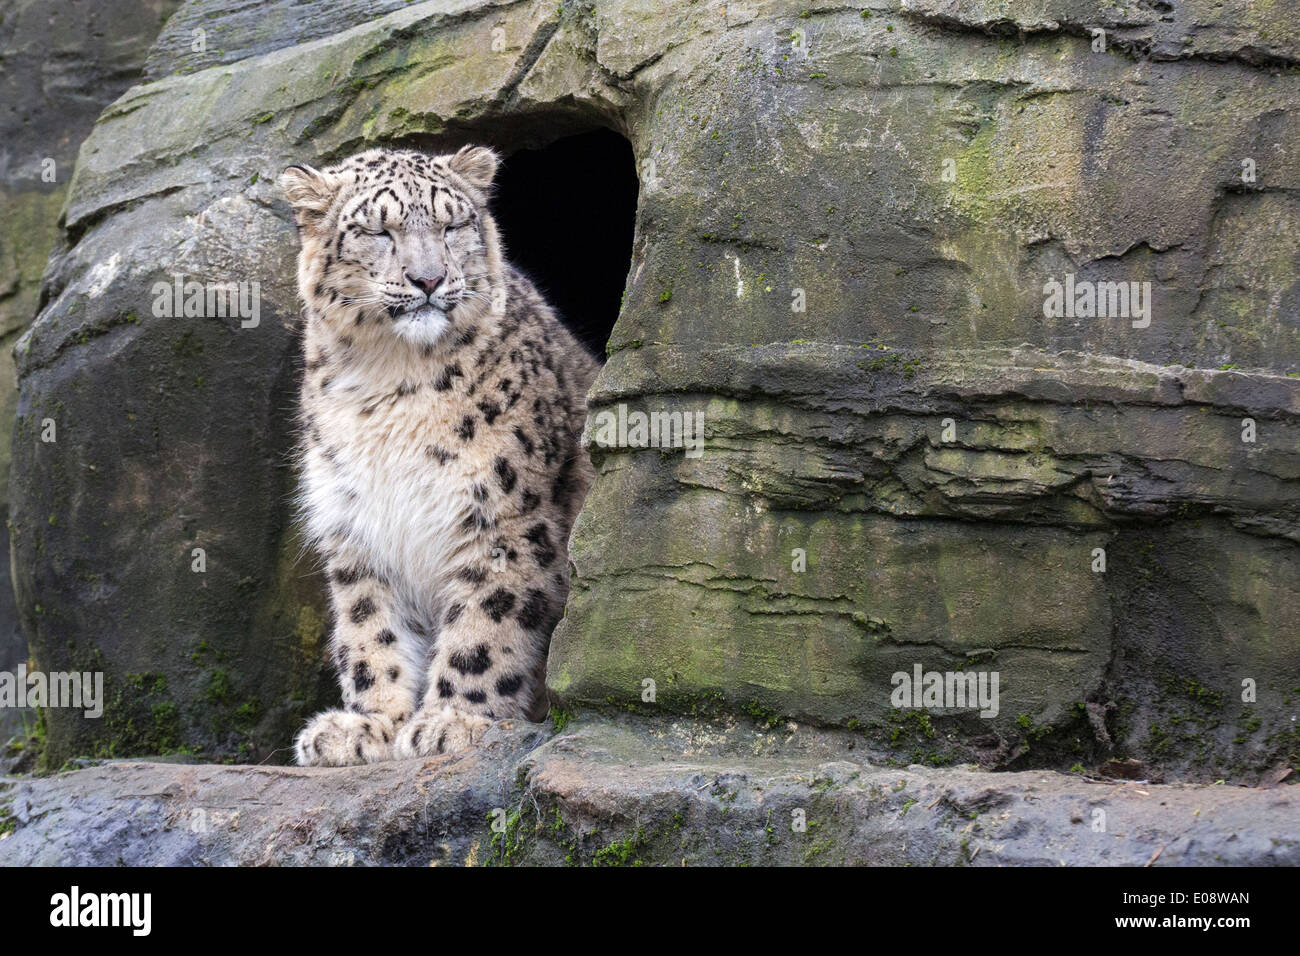 One-year-old Snow Leopard Banque D'Images